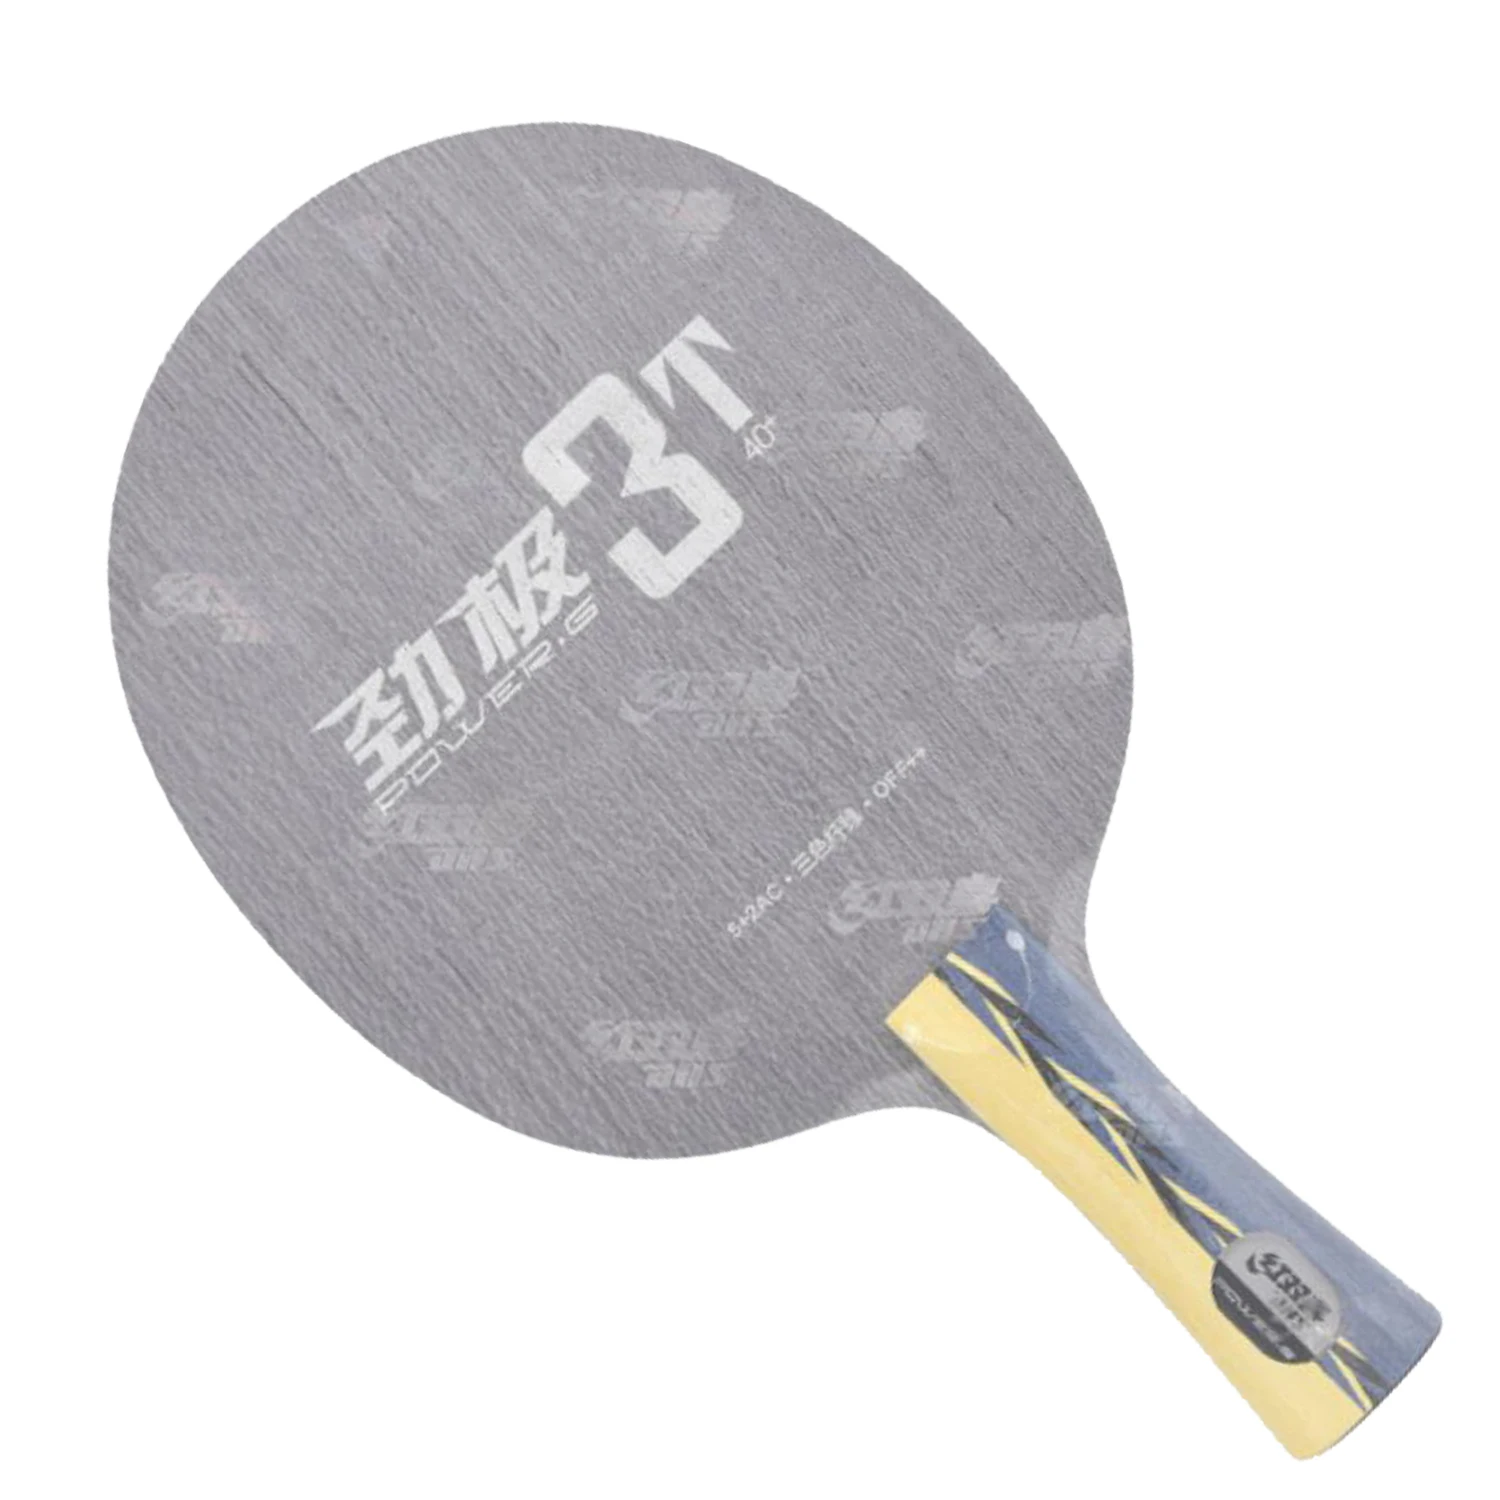 Original DHS power G 3T PG 3T table tennis blade carbon blade for 40+ table tennis racket ping pong game